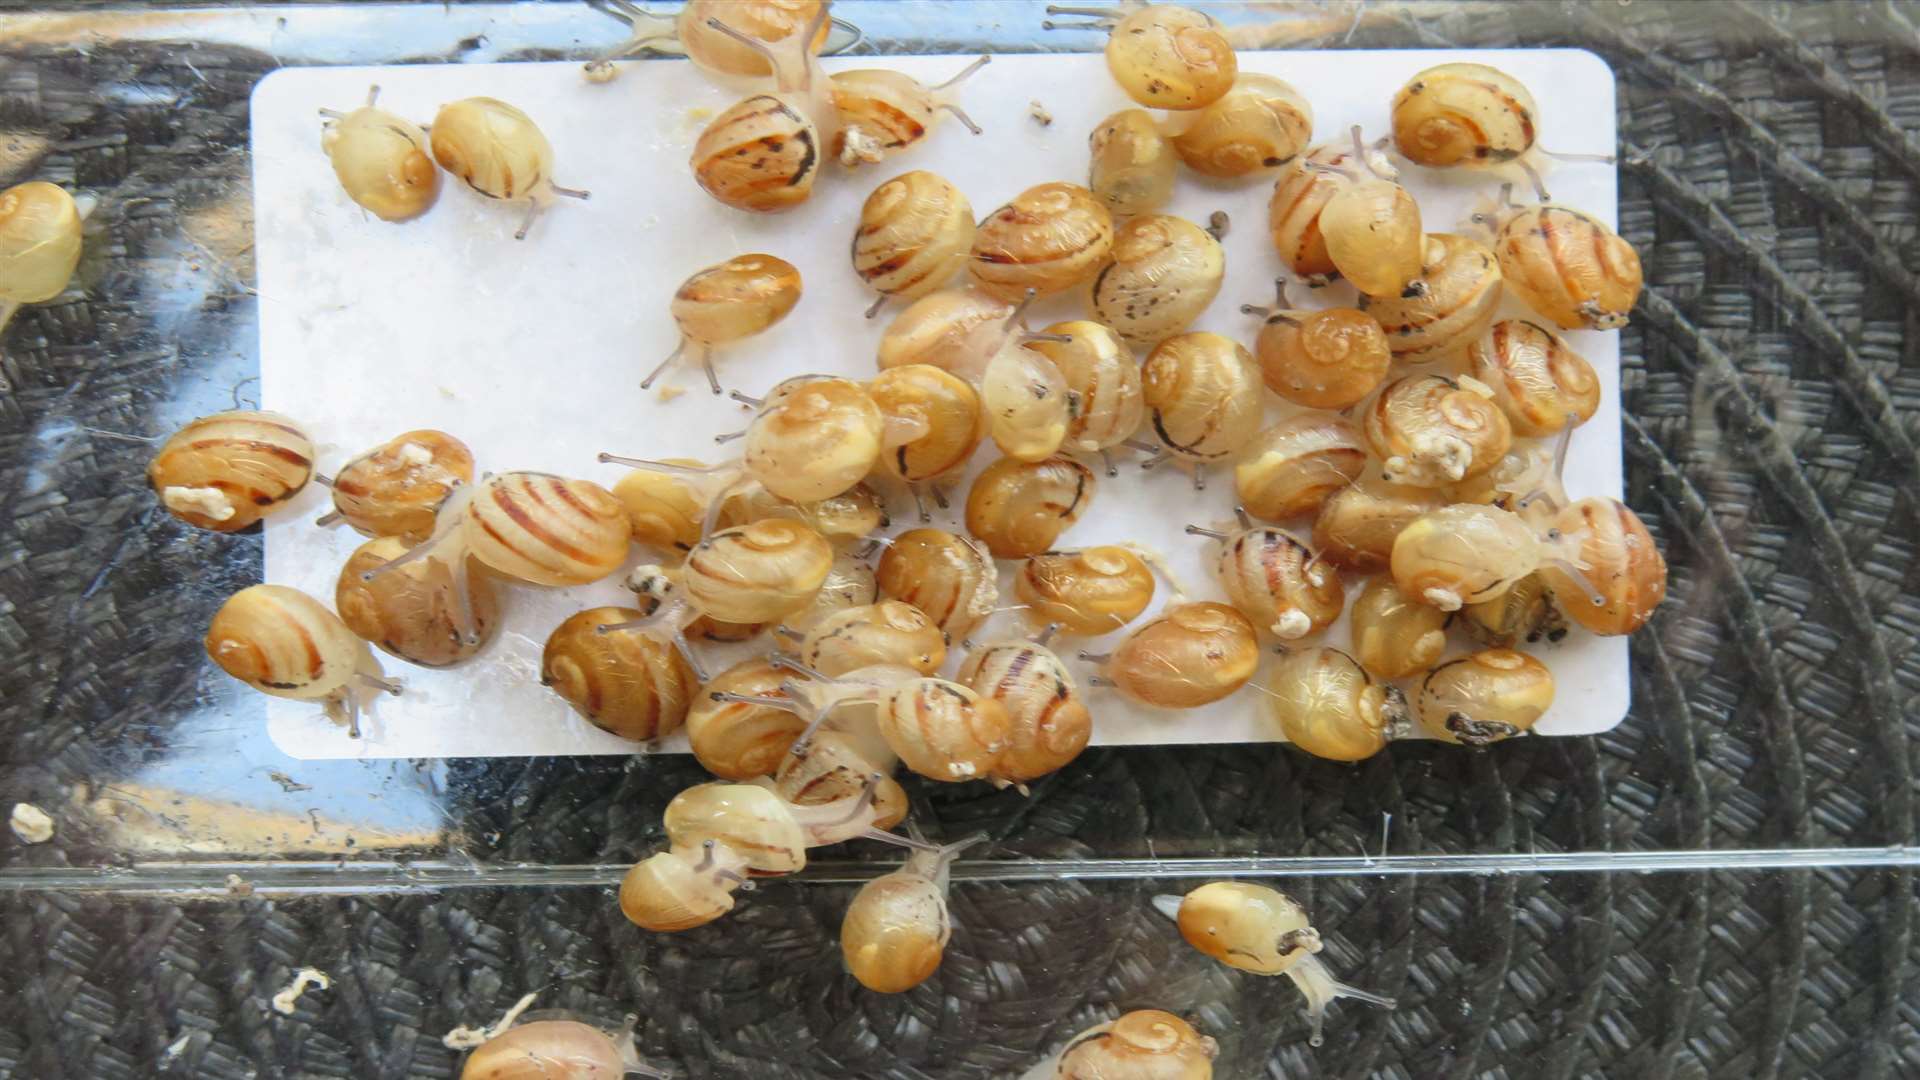 Baby snails destined for the dinner table